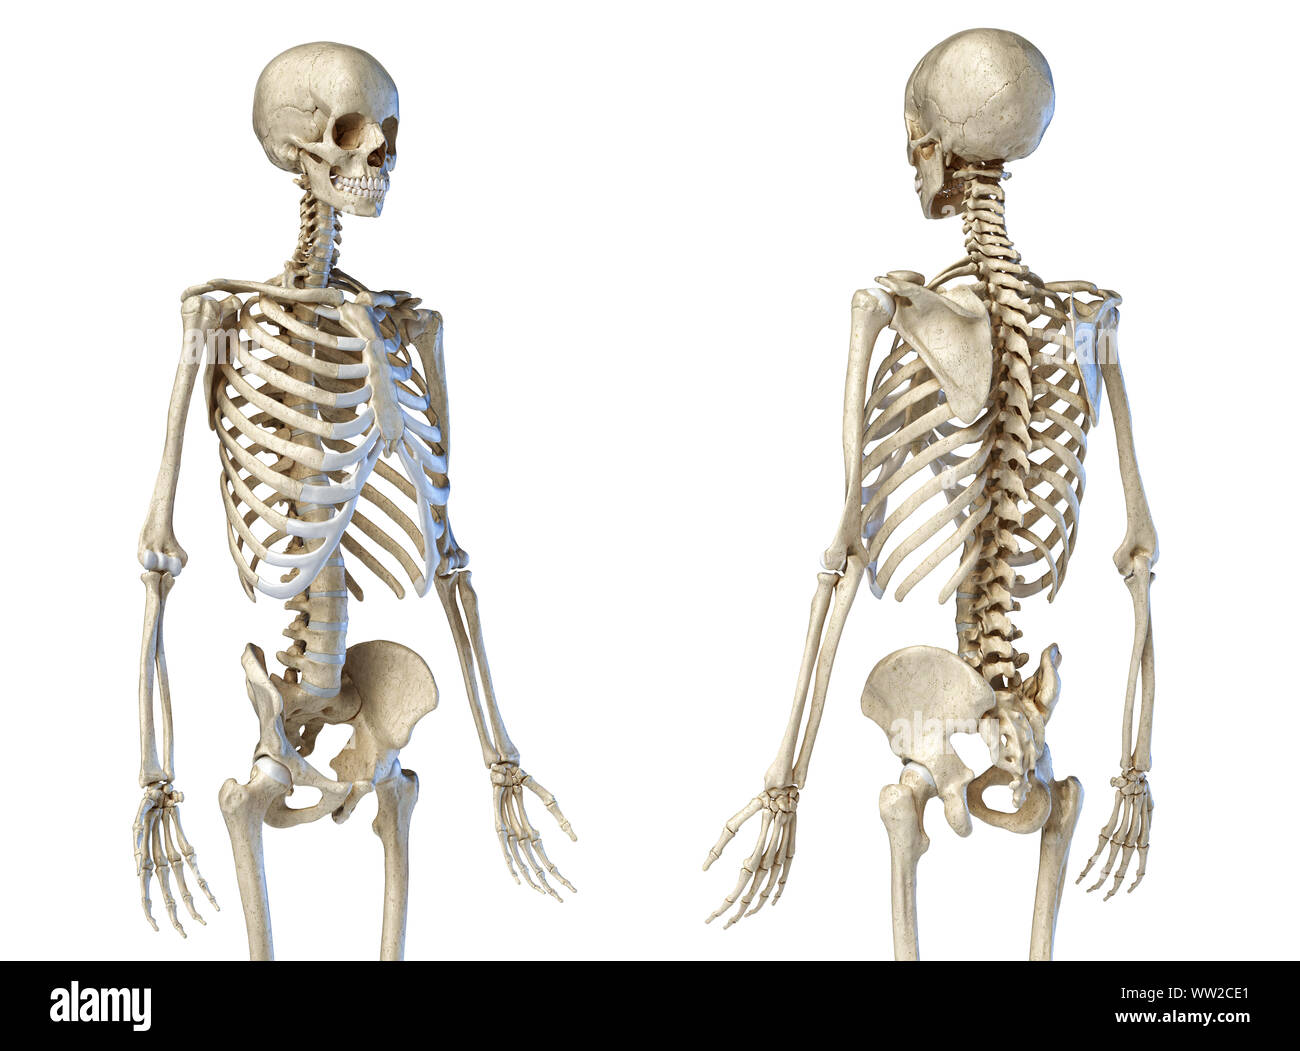 Human Anatomy 3/4 body male skeleton. Perspective Front and rear views on white background. 3d illustration. Stock Photo